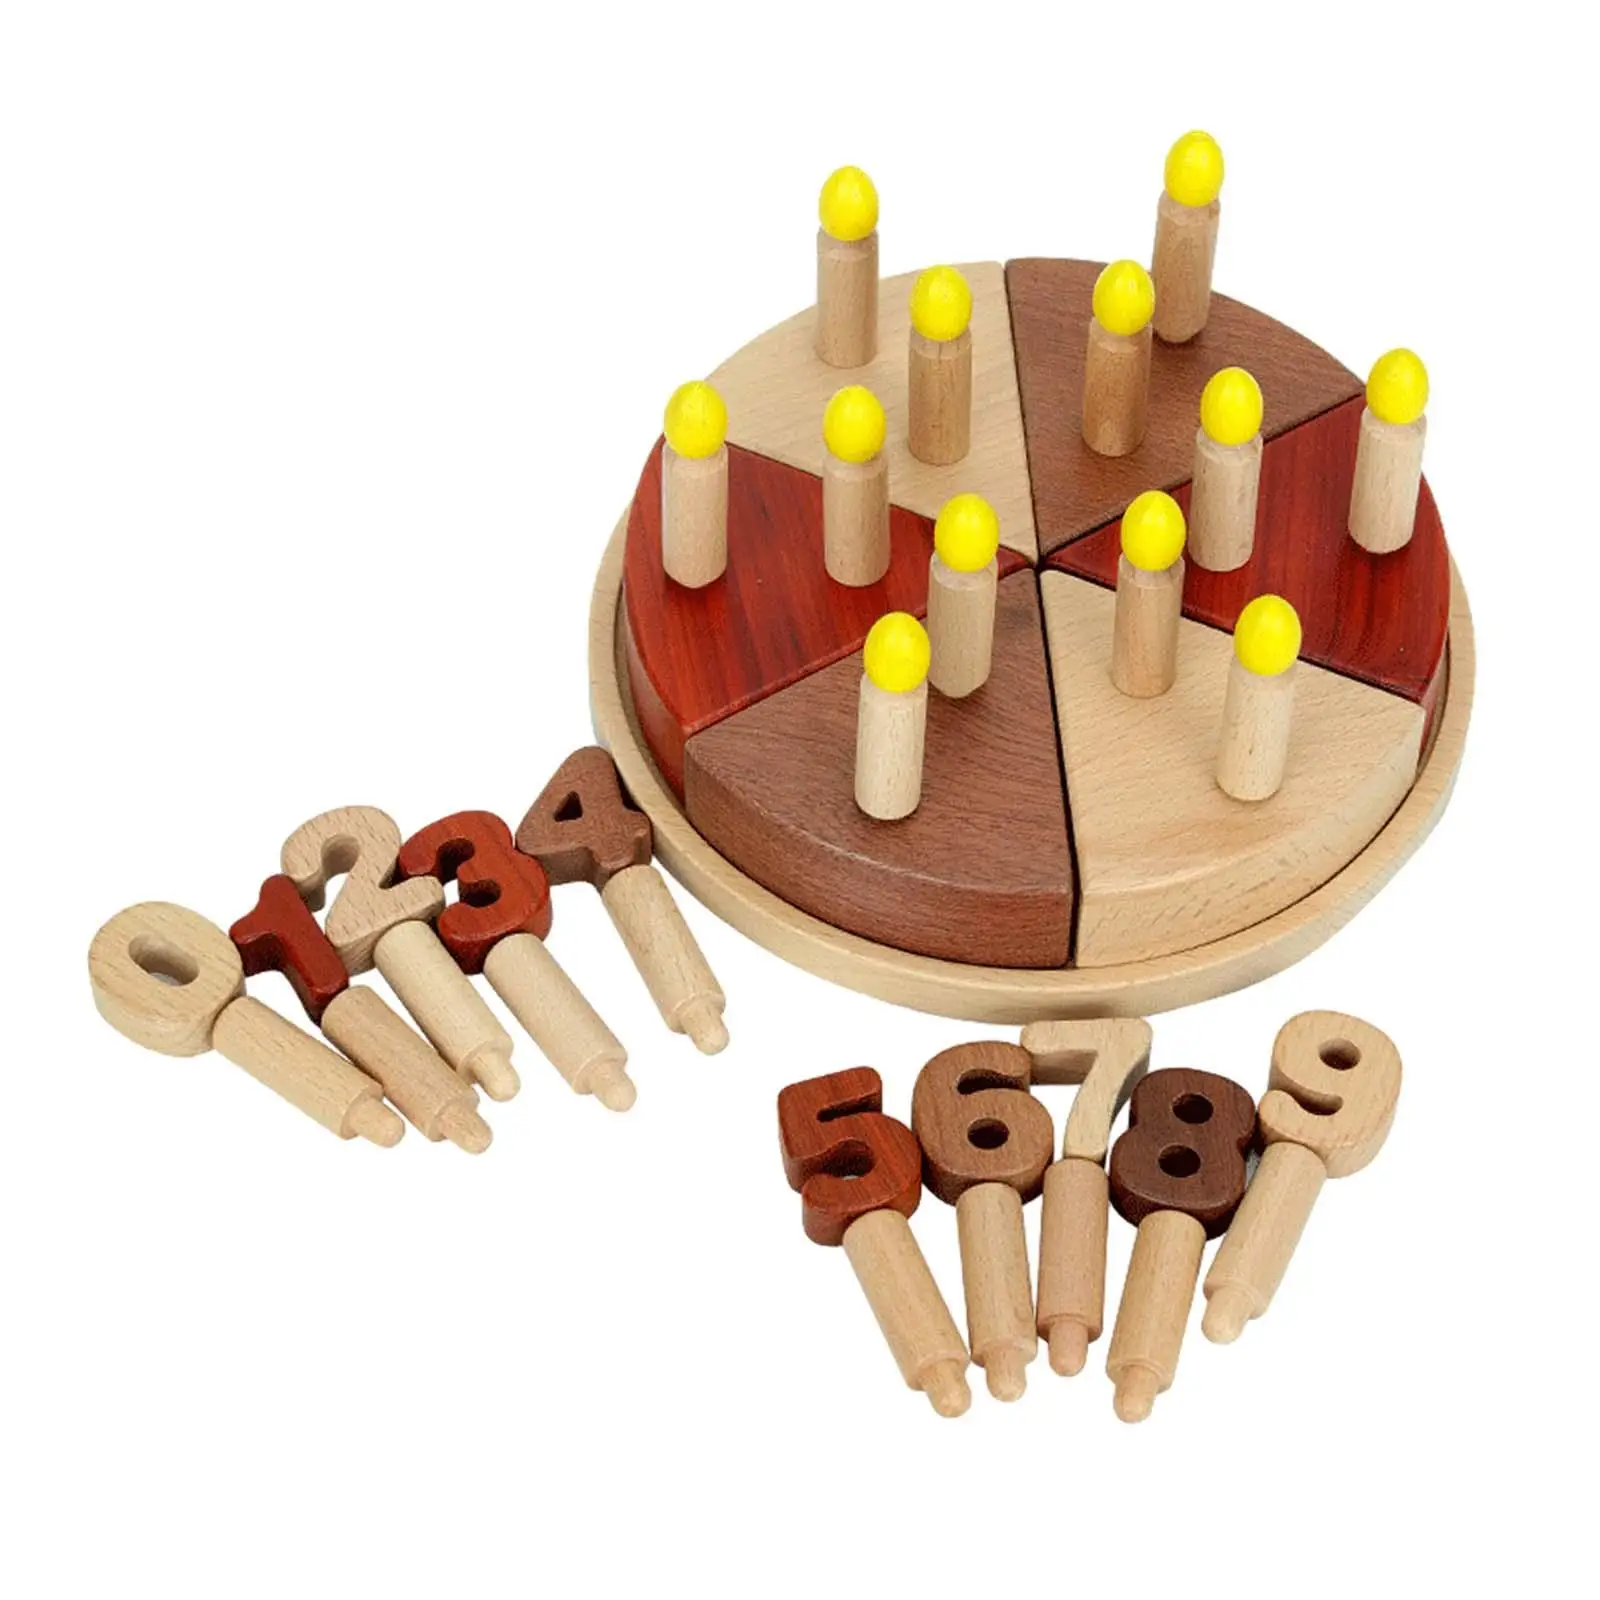 Wooden Birthday Cake Toys Role Play Toy Montessori Gift DIY Play Set Tea Party Toy Playset for Boys Baby Toddlers Preschool